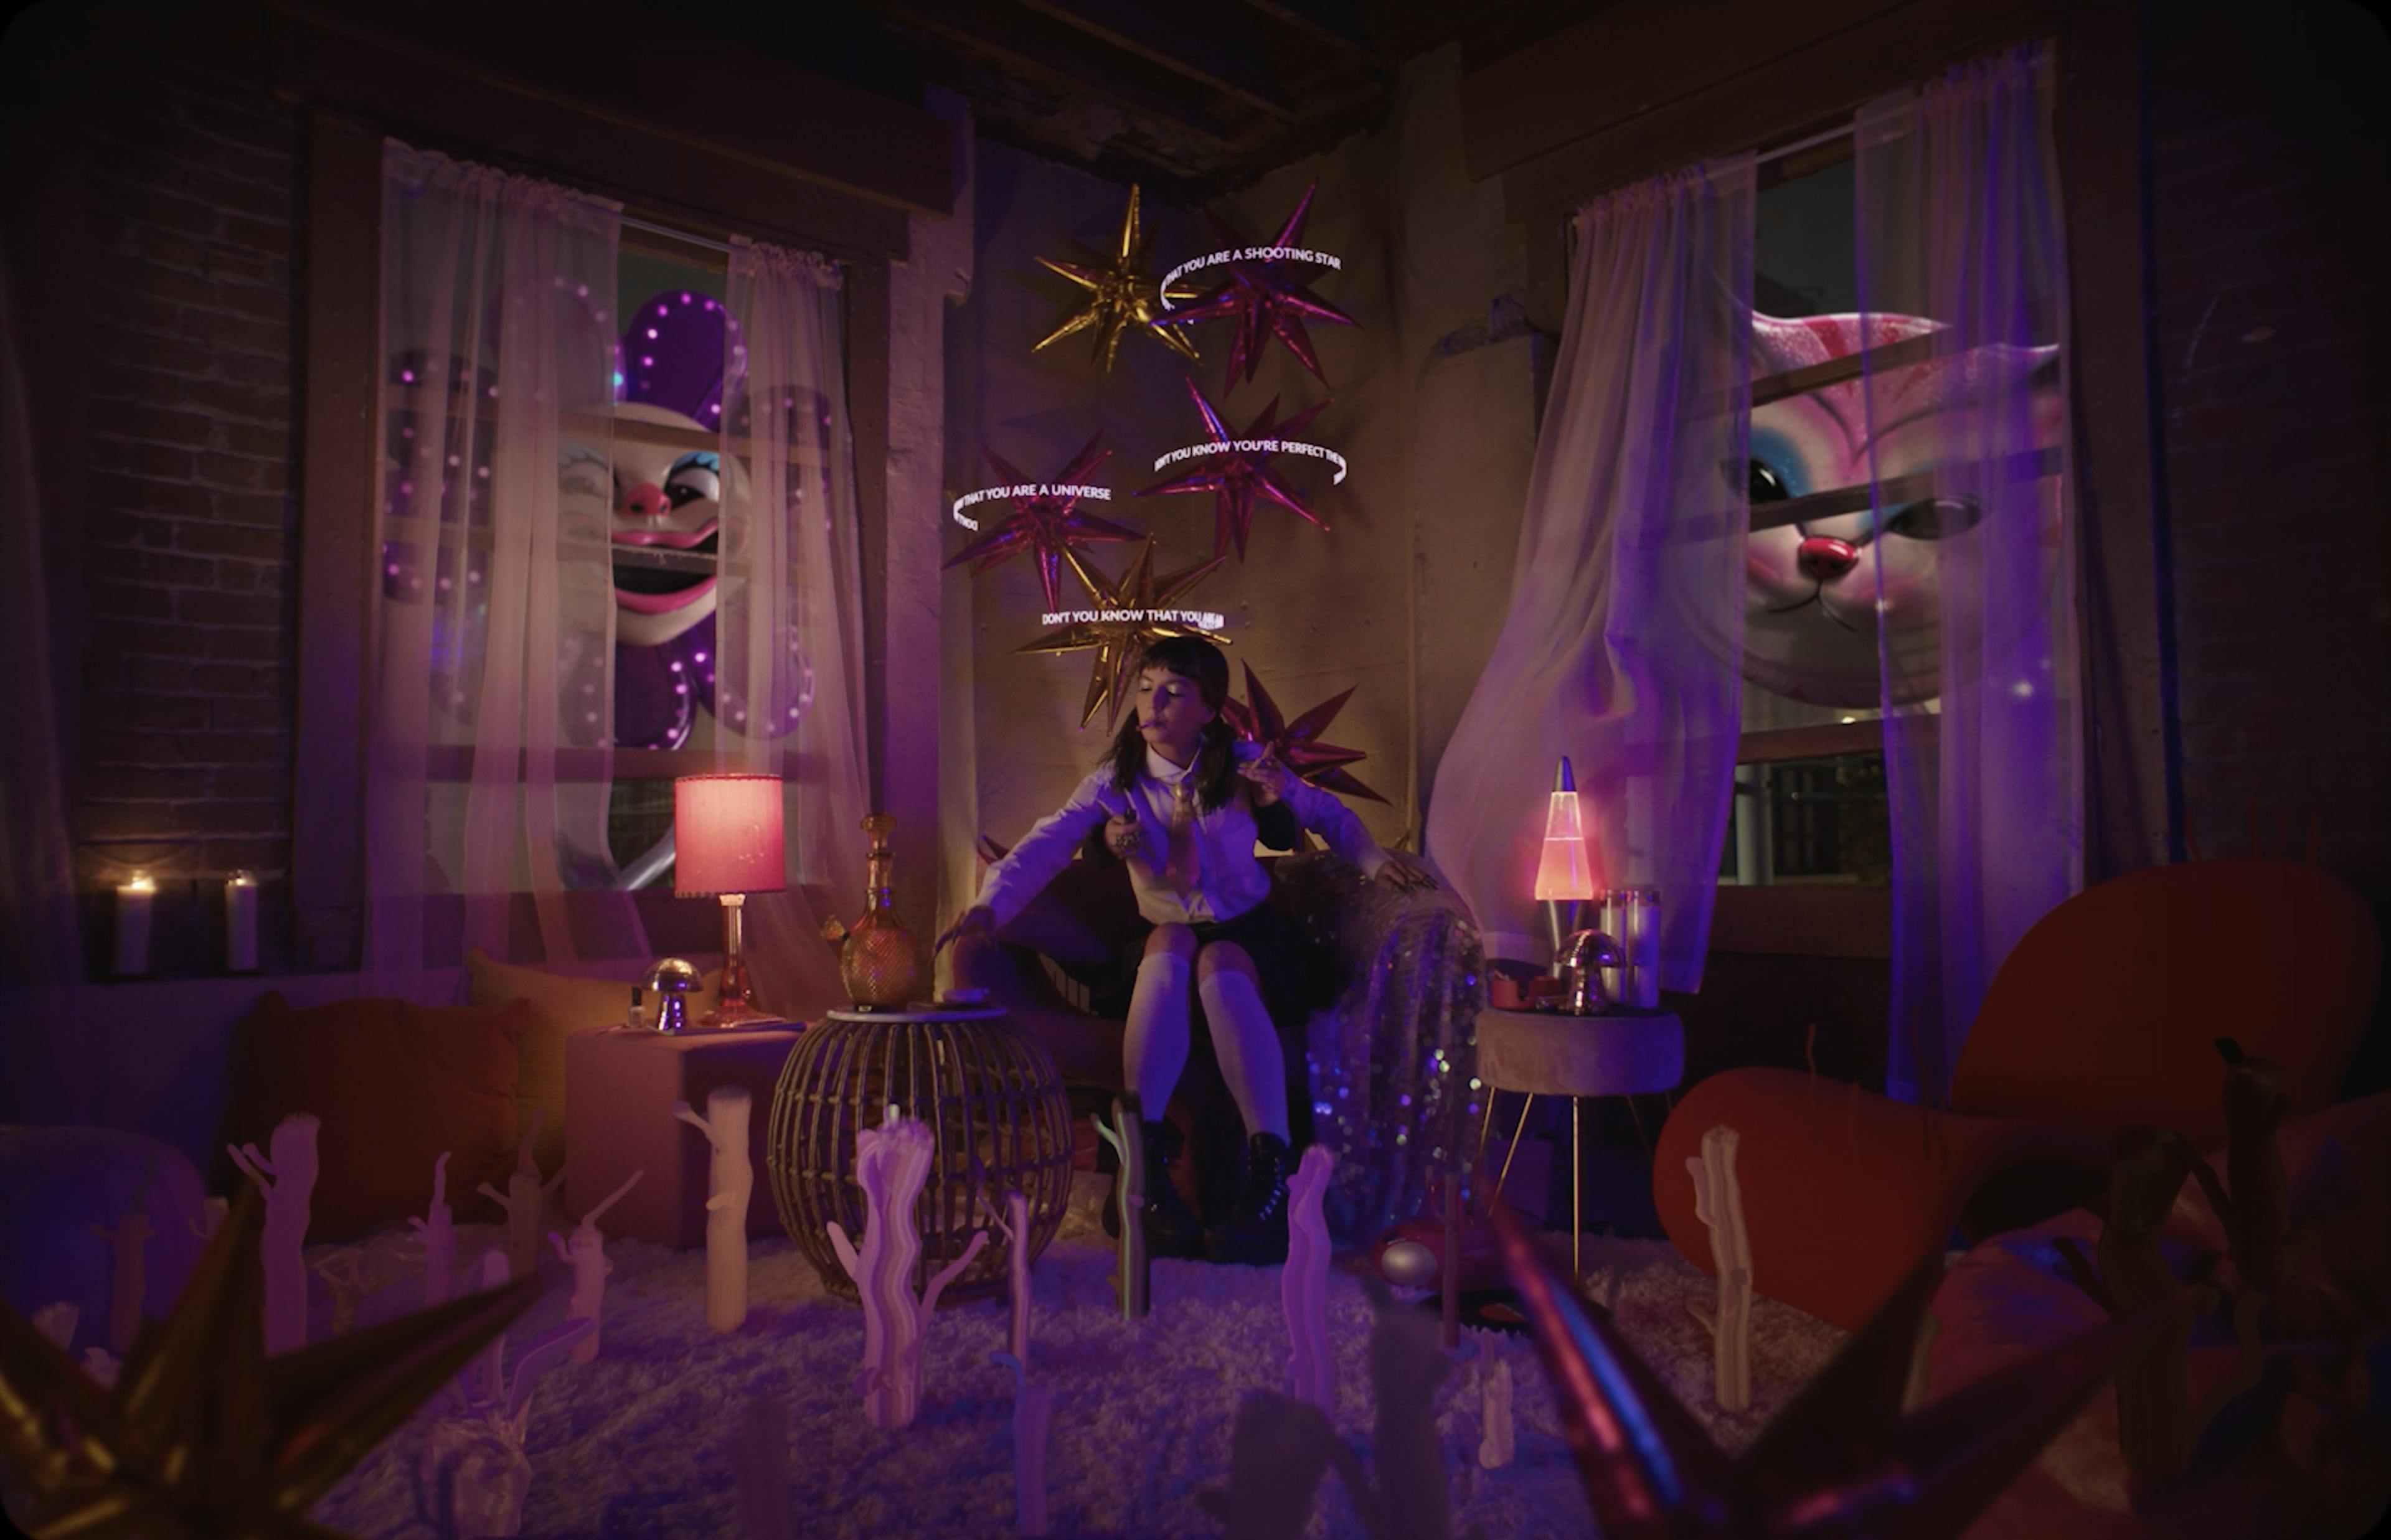 A woman sits in a room with candles and an animated flower and cat outside the window